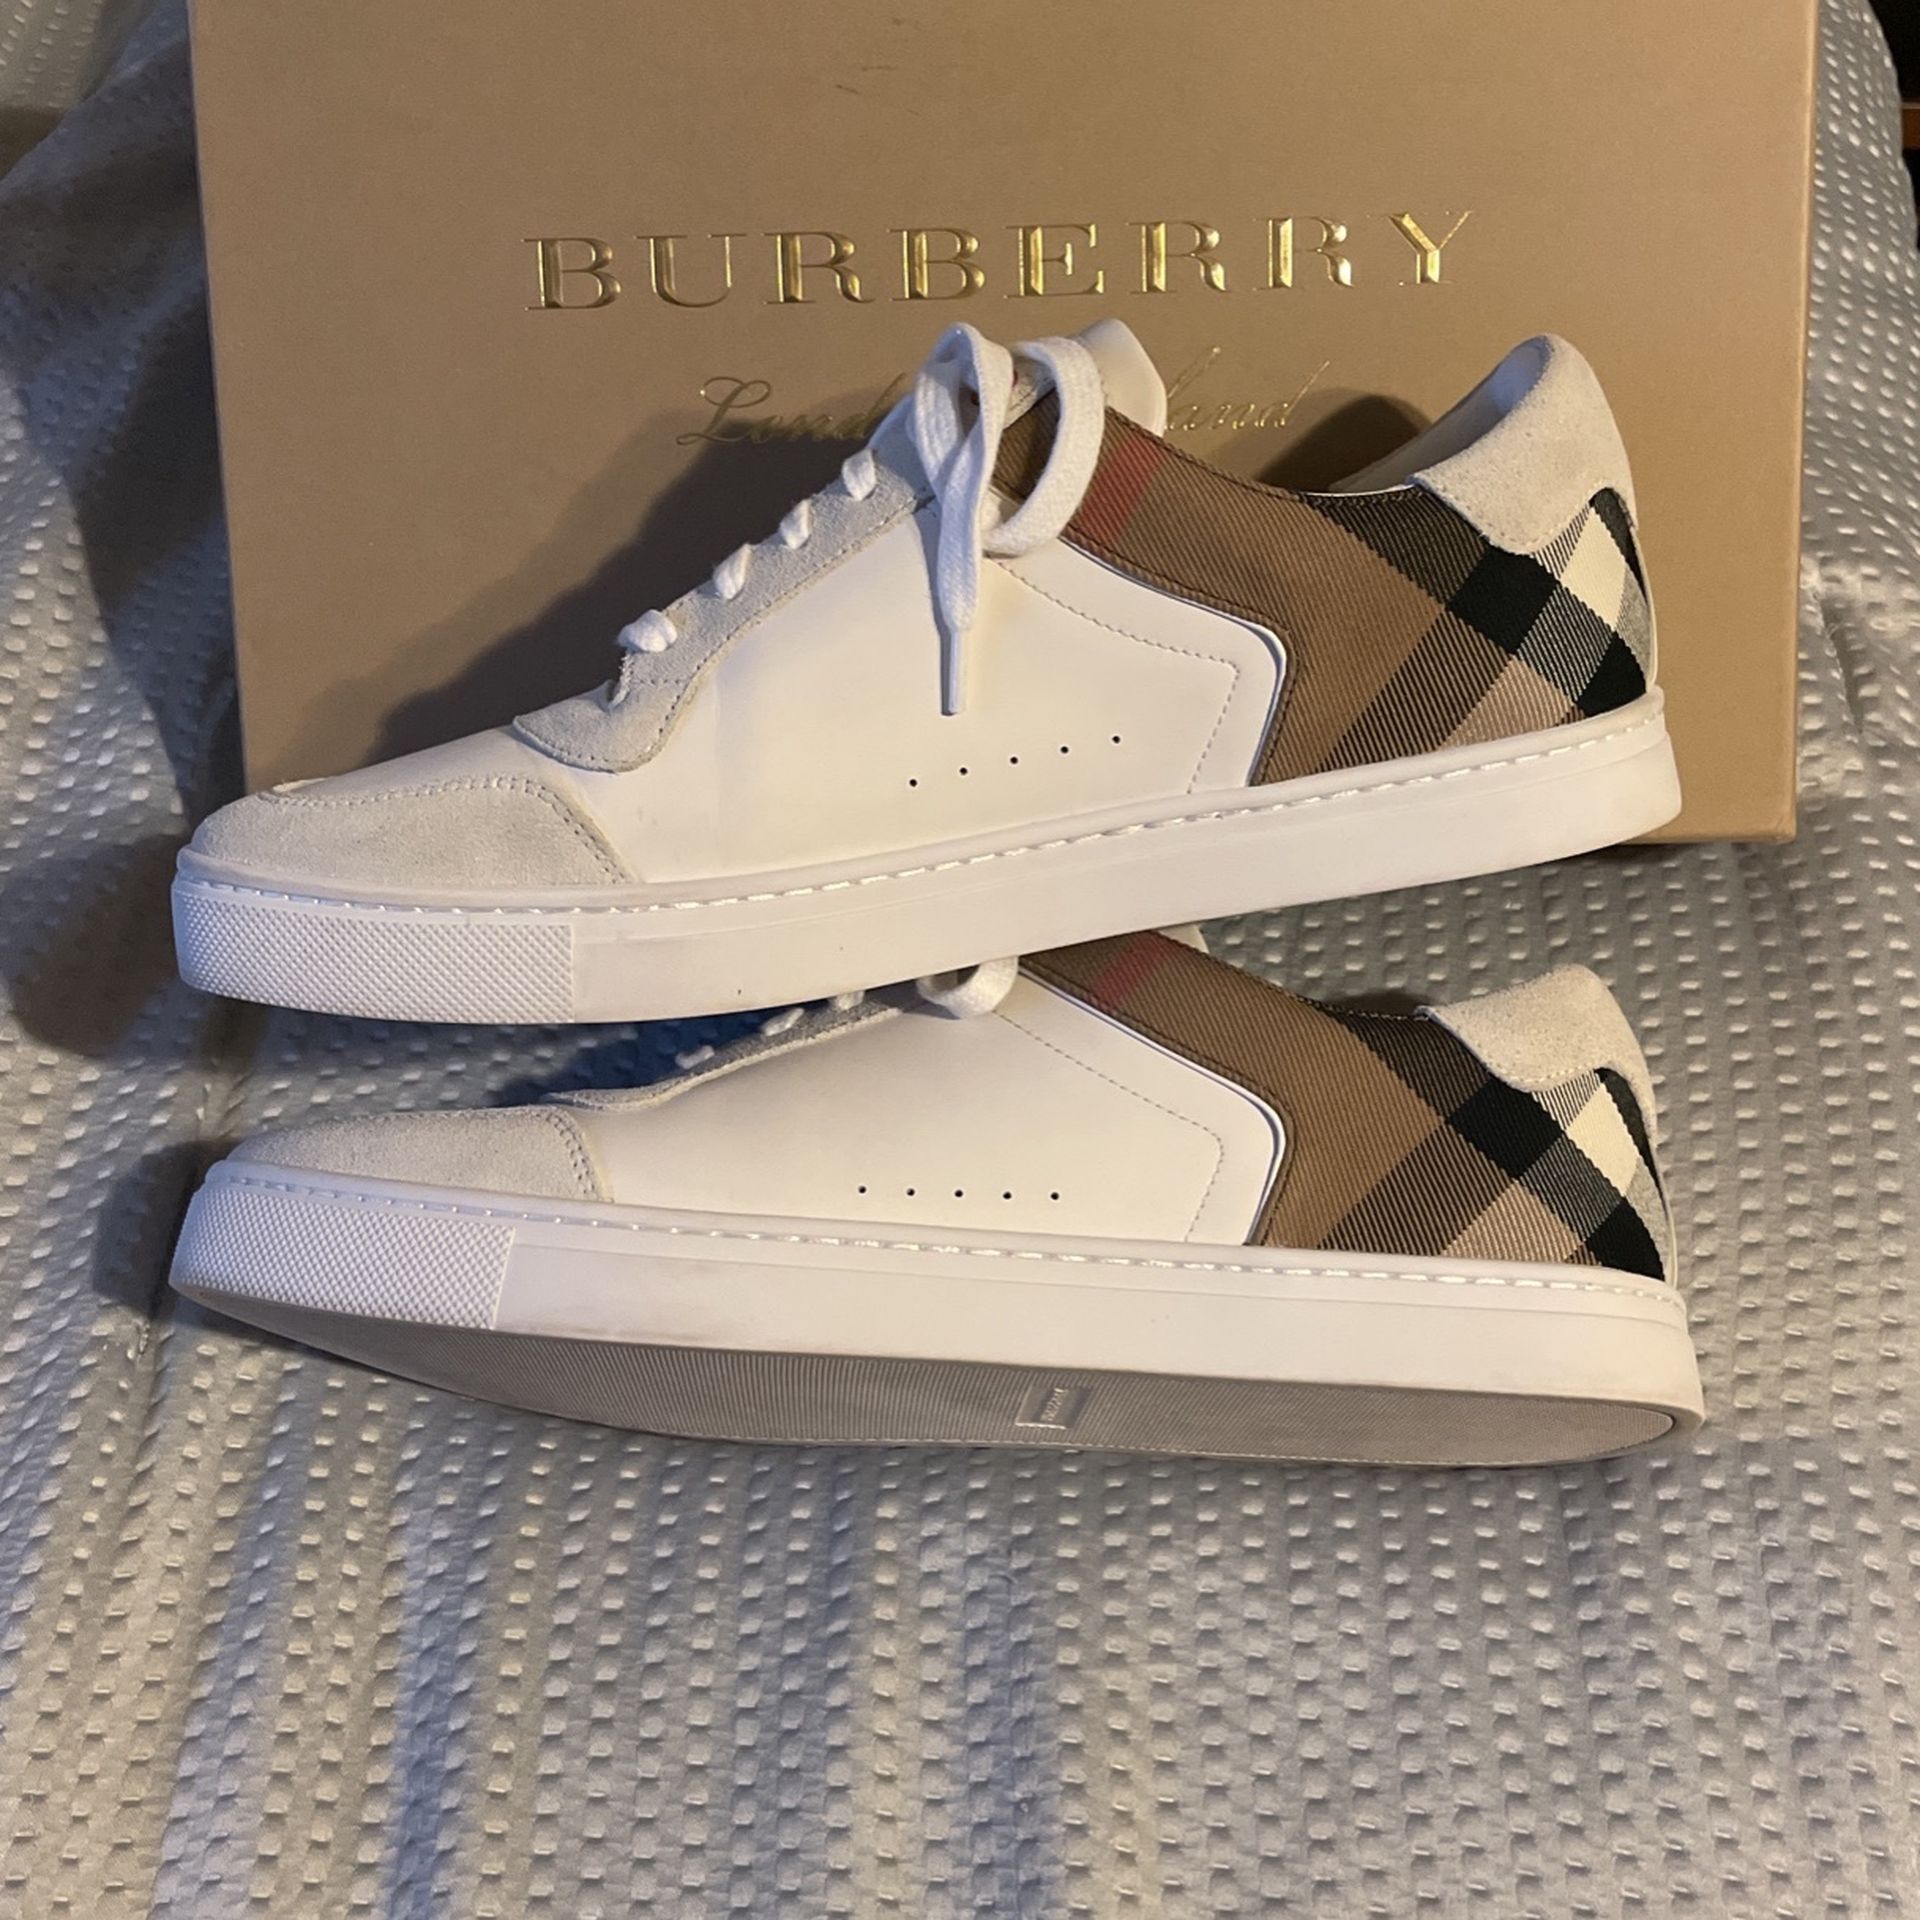 Burberry Mens Size 9 (43 Europe size)